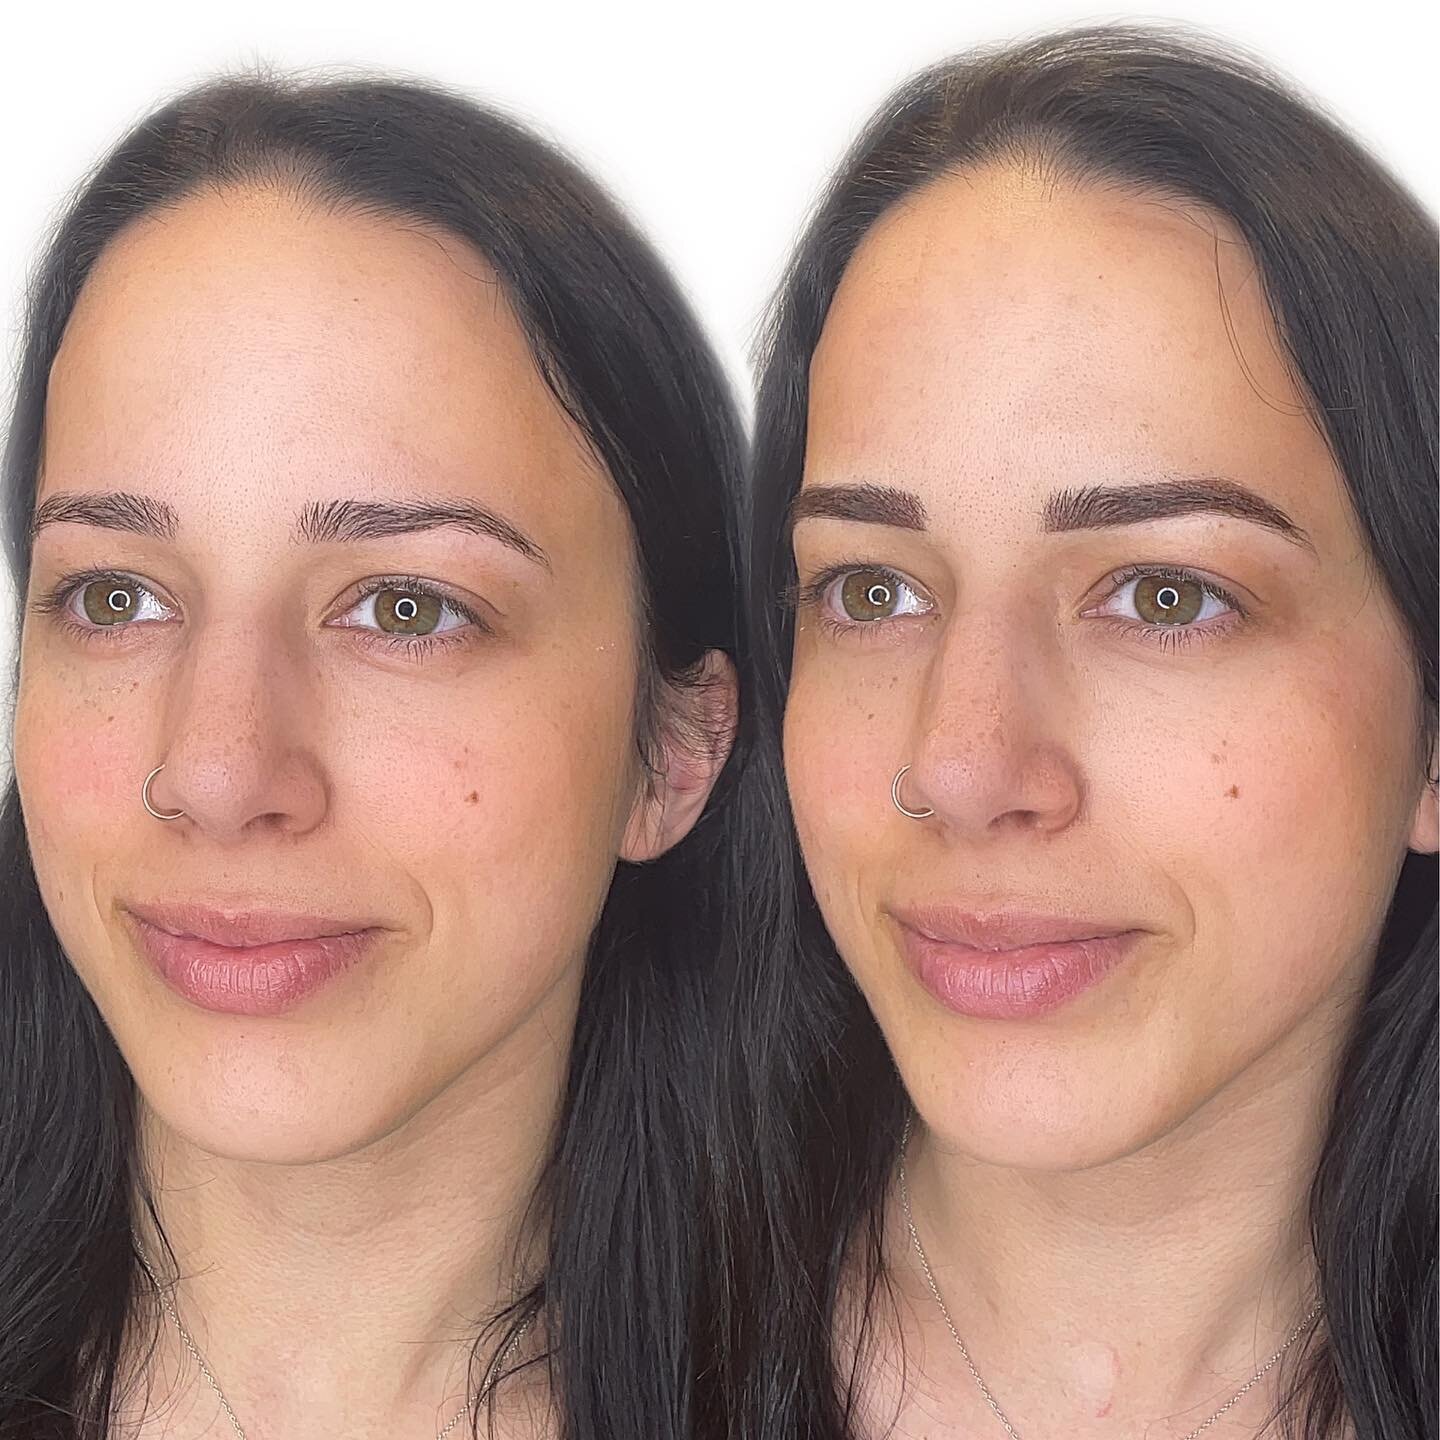 First session powder brows

Client already had full natural brows but wanted more definition and to skip daily makeup application.

What&rsquo;s better than being able to wake up ready to go?